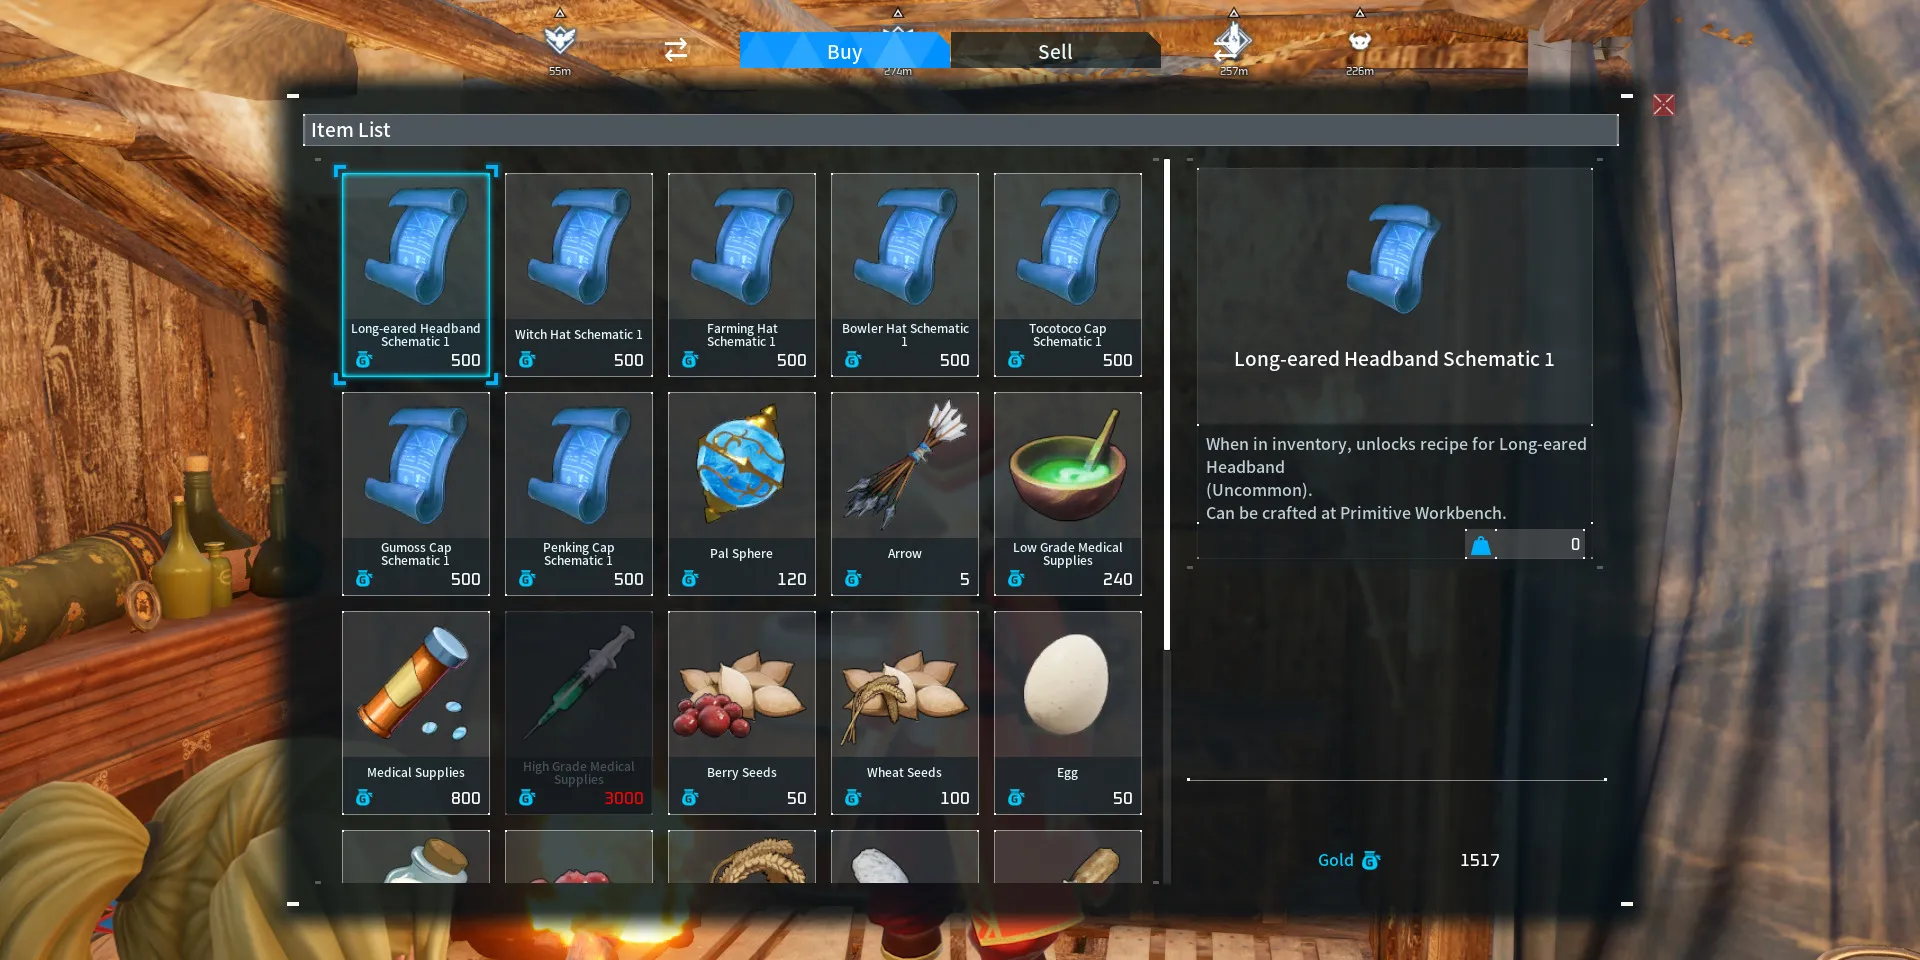 Image of some of the available stock from the Wandering Merchant in Palworld